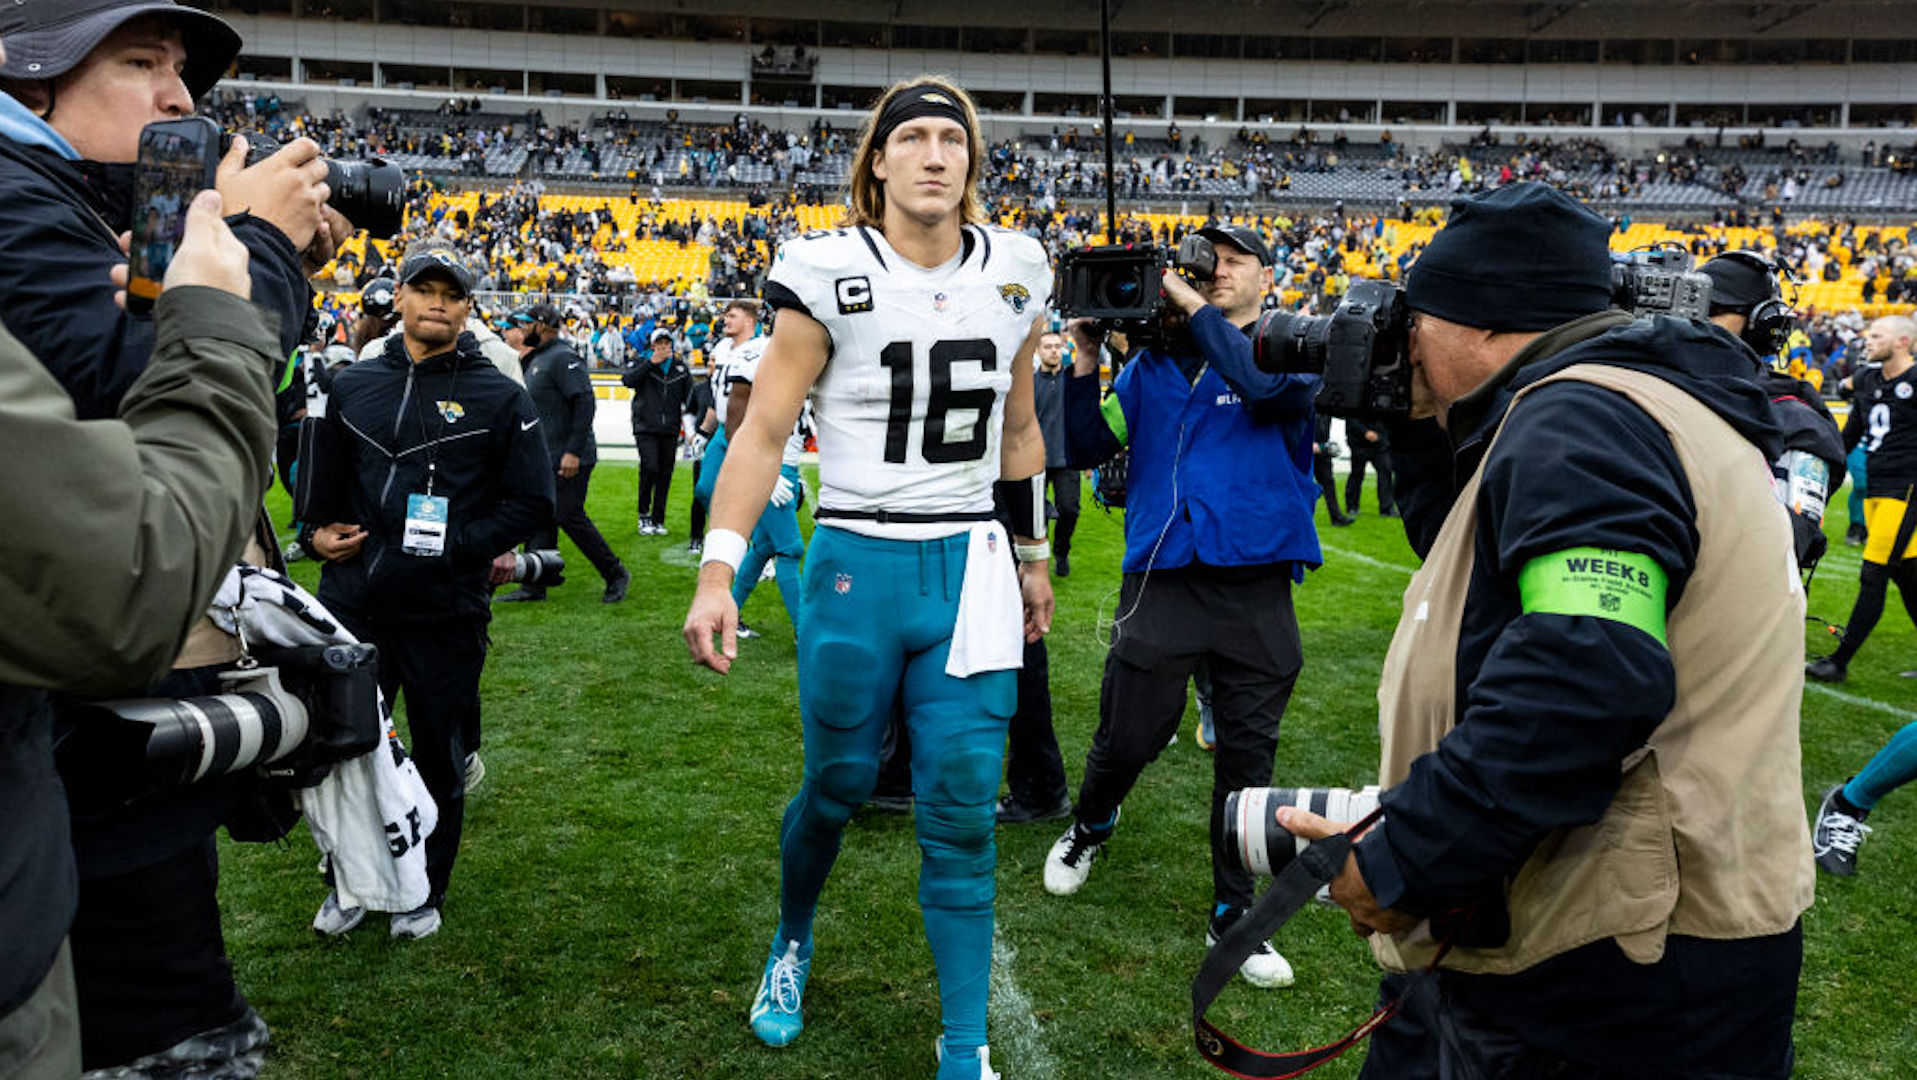 Trevor Lawrence #16 of the Jacksonville Jaguars walks onto the field after the game against the Pittsburgh Steelers at Acrisure Stadium on October 29, 2023 in Pittsburgh, Pennsylvania. The Jaguars beat the Steelers 20-10.